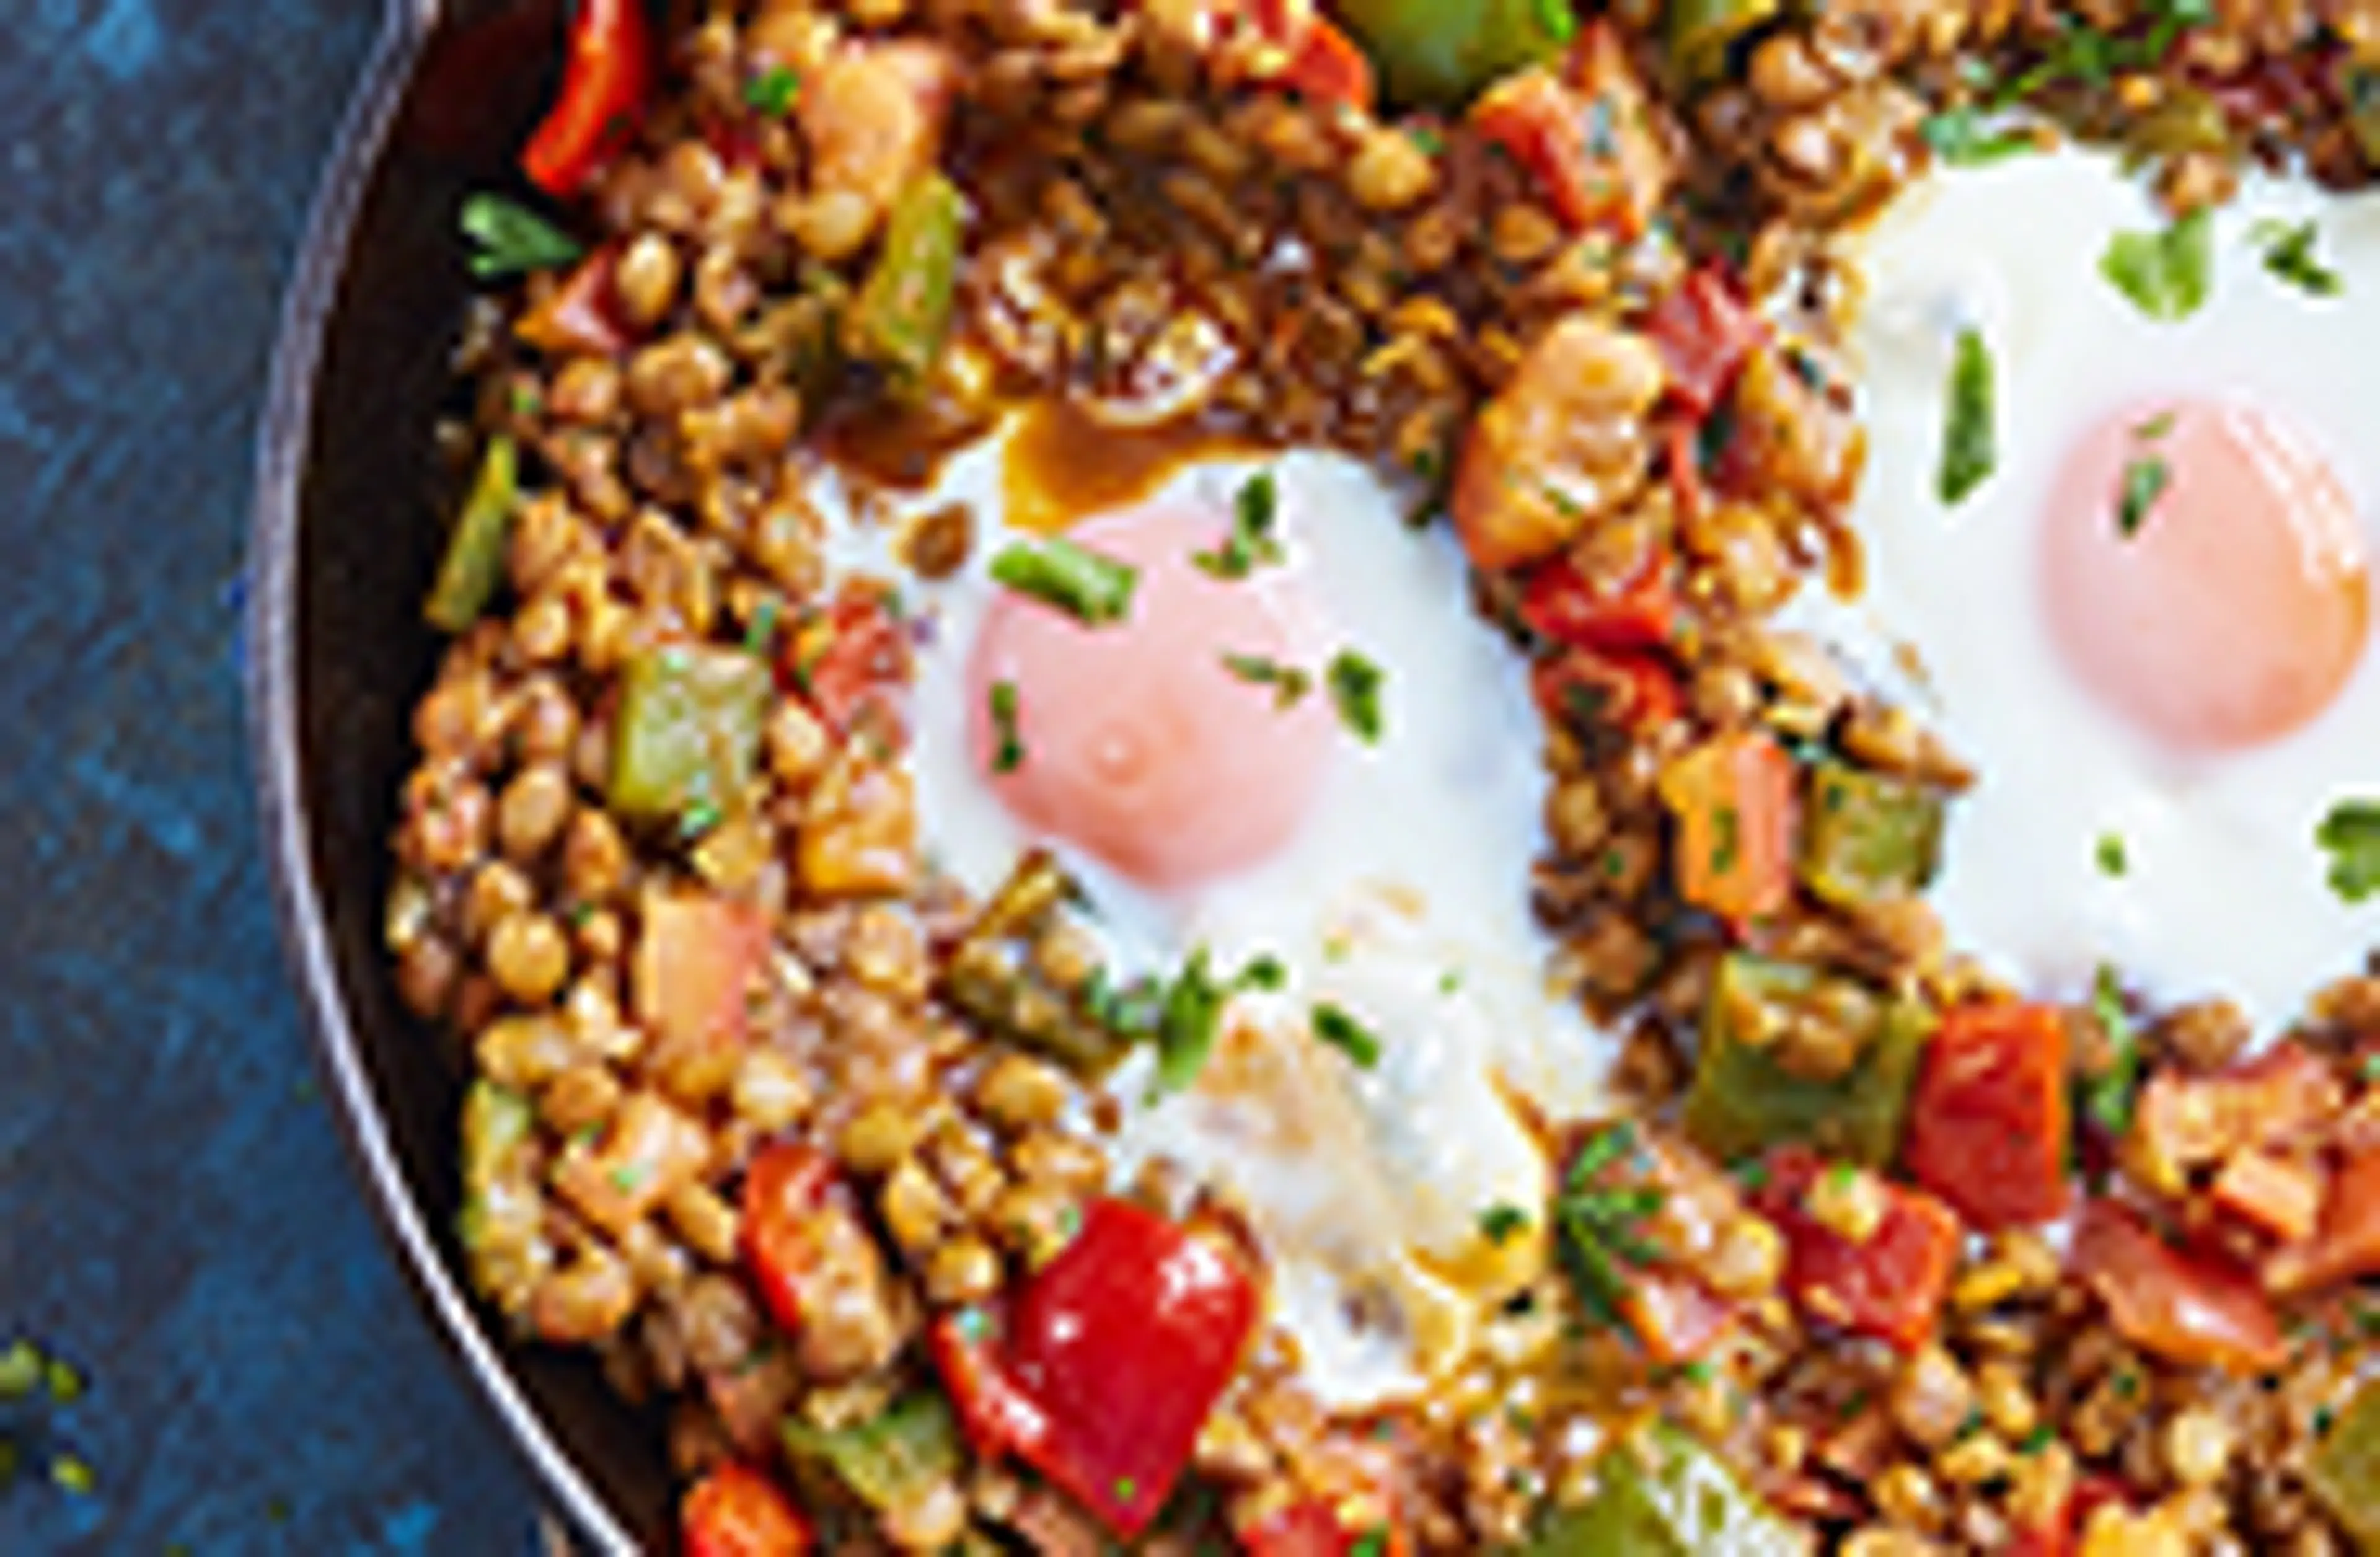 Spanish-style lentils with eggs